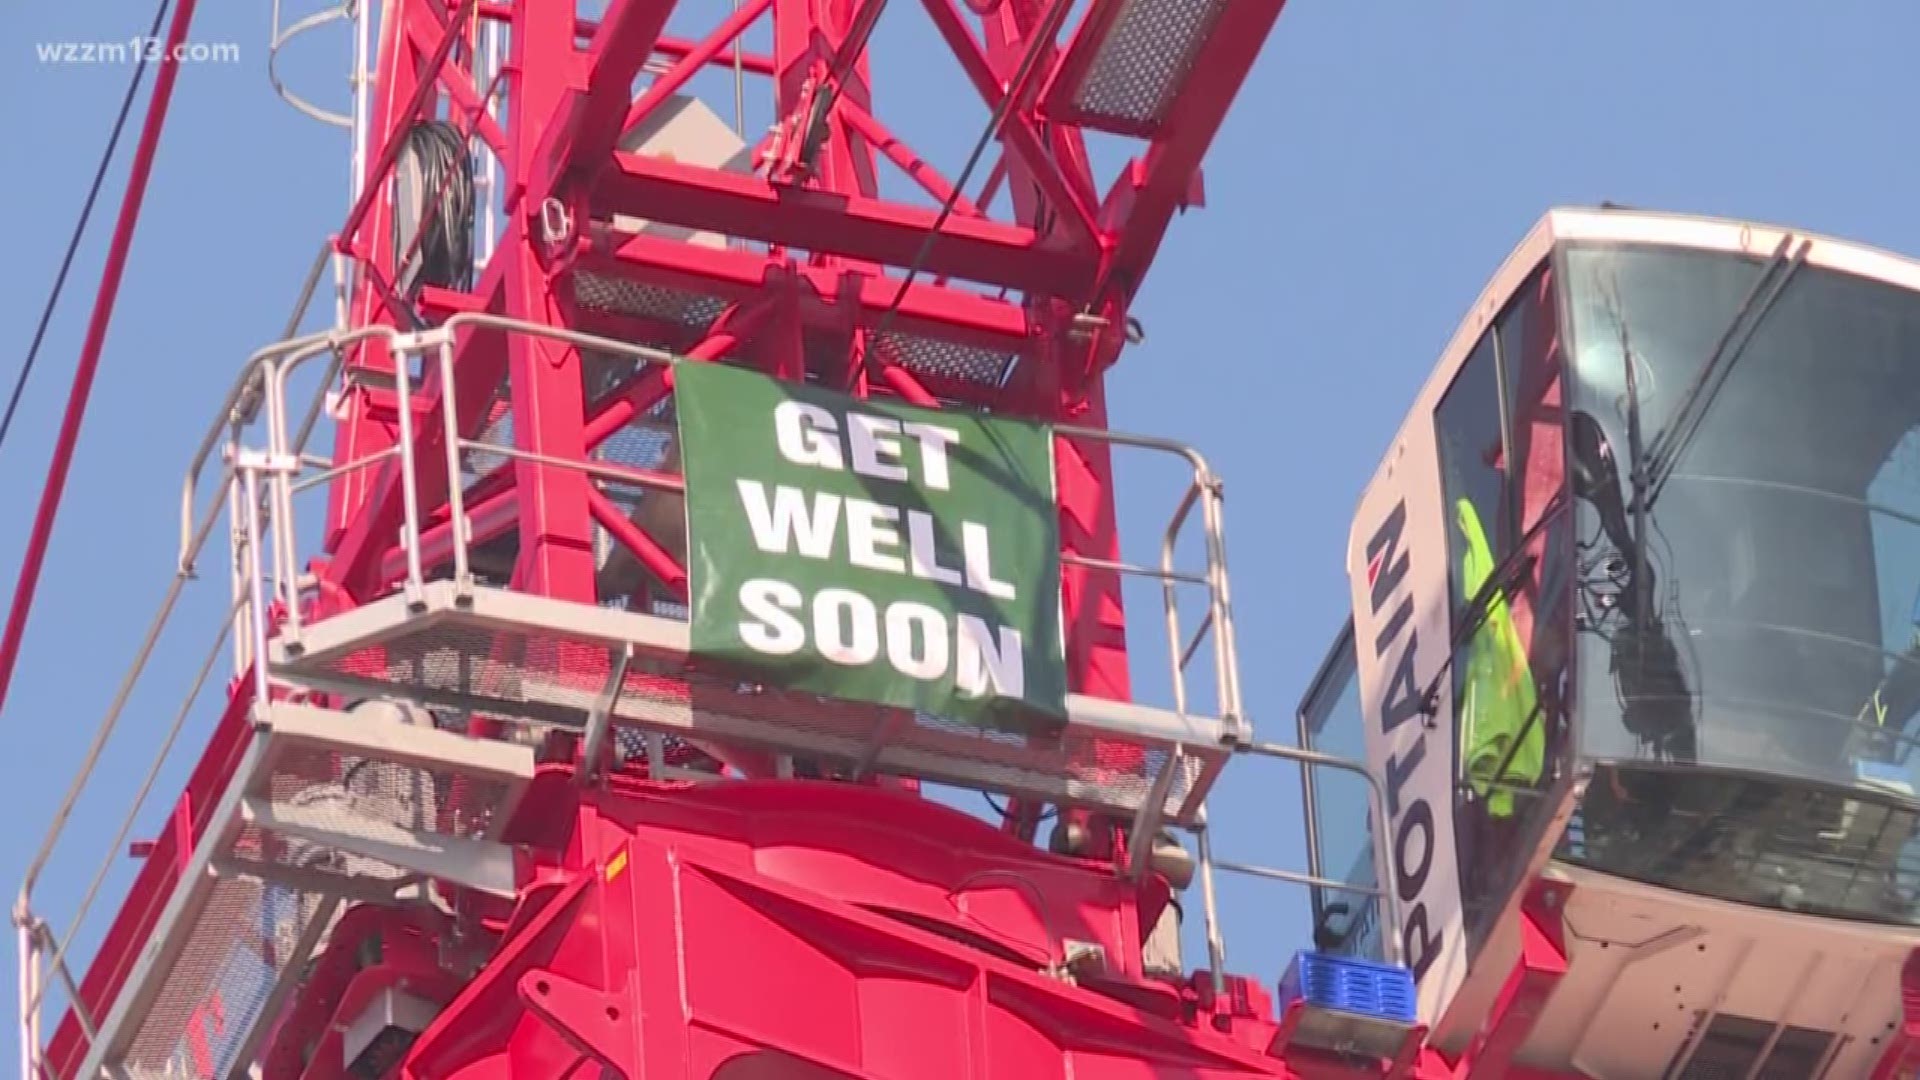 Crane operator sends hospital patient well wishes.